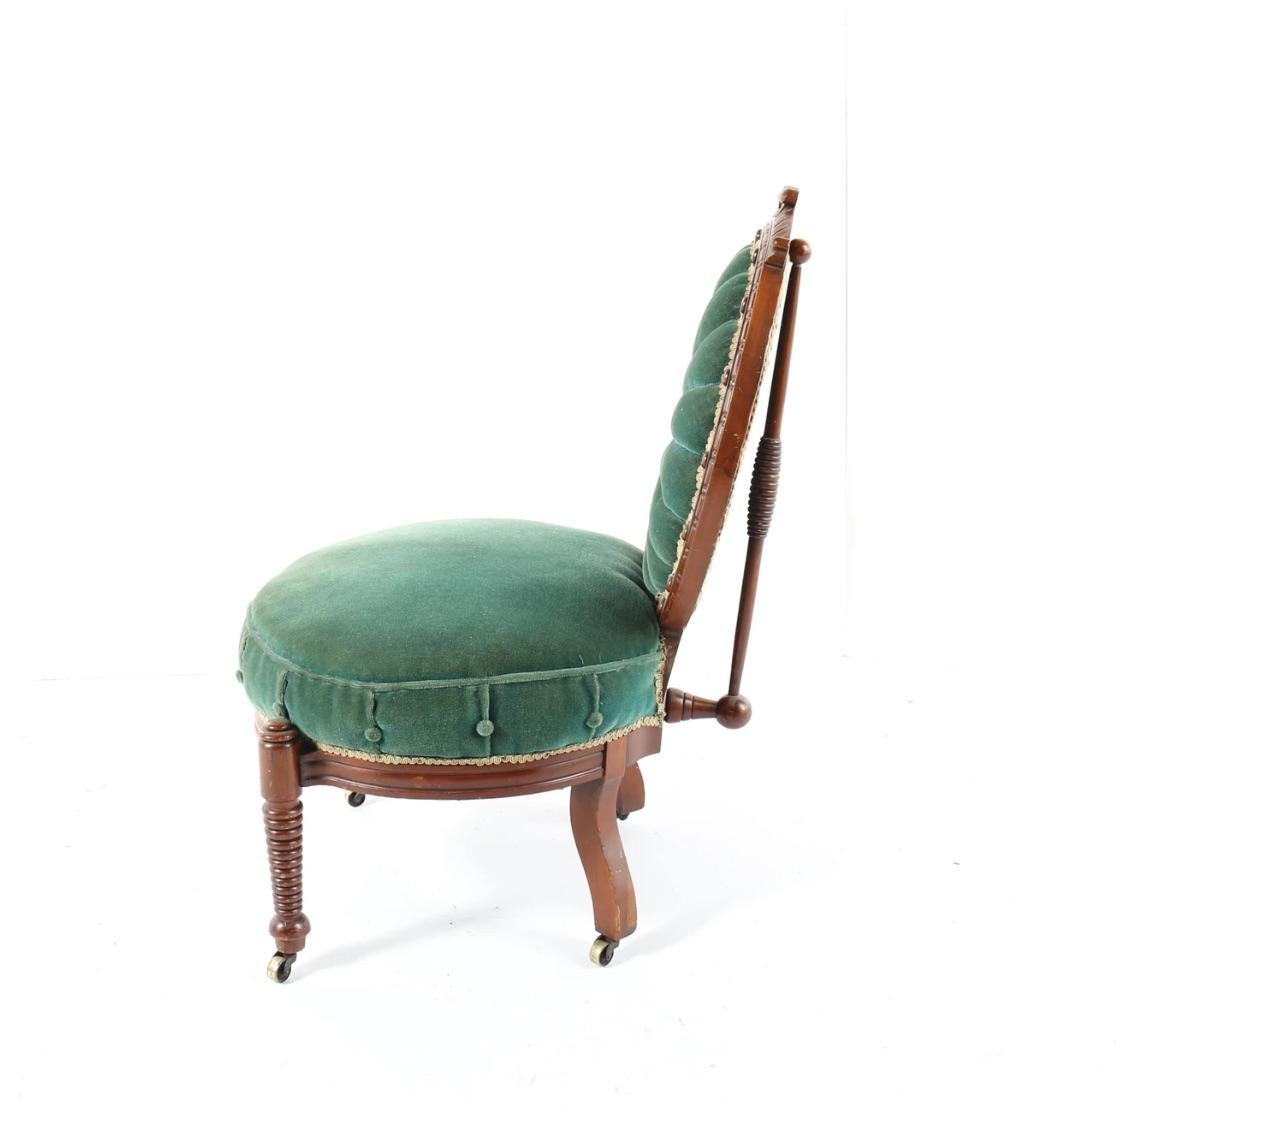 Hand-Carved 1800s Victorian Balloon Back Accent Chair on Casters in Emerald Green Velvet For Sale